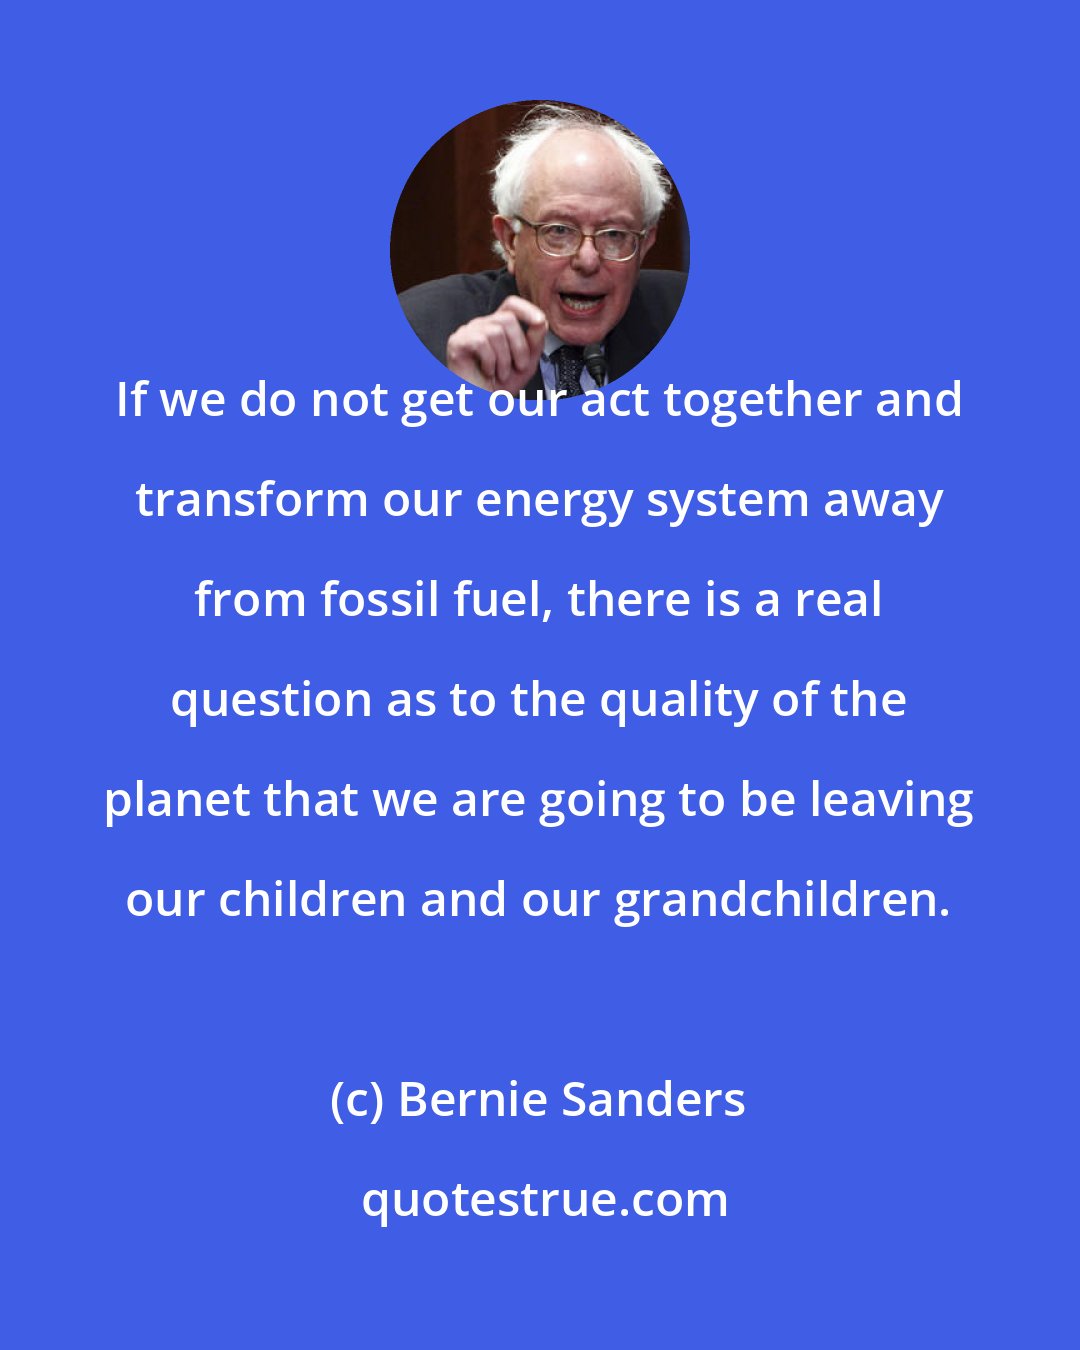 Bernie Sanders: If we do not get our act together and transform our energy system away from fossil fuel, there is a real question as to the quality of the planet that we are going to be leaving our children and our grandchildren.